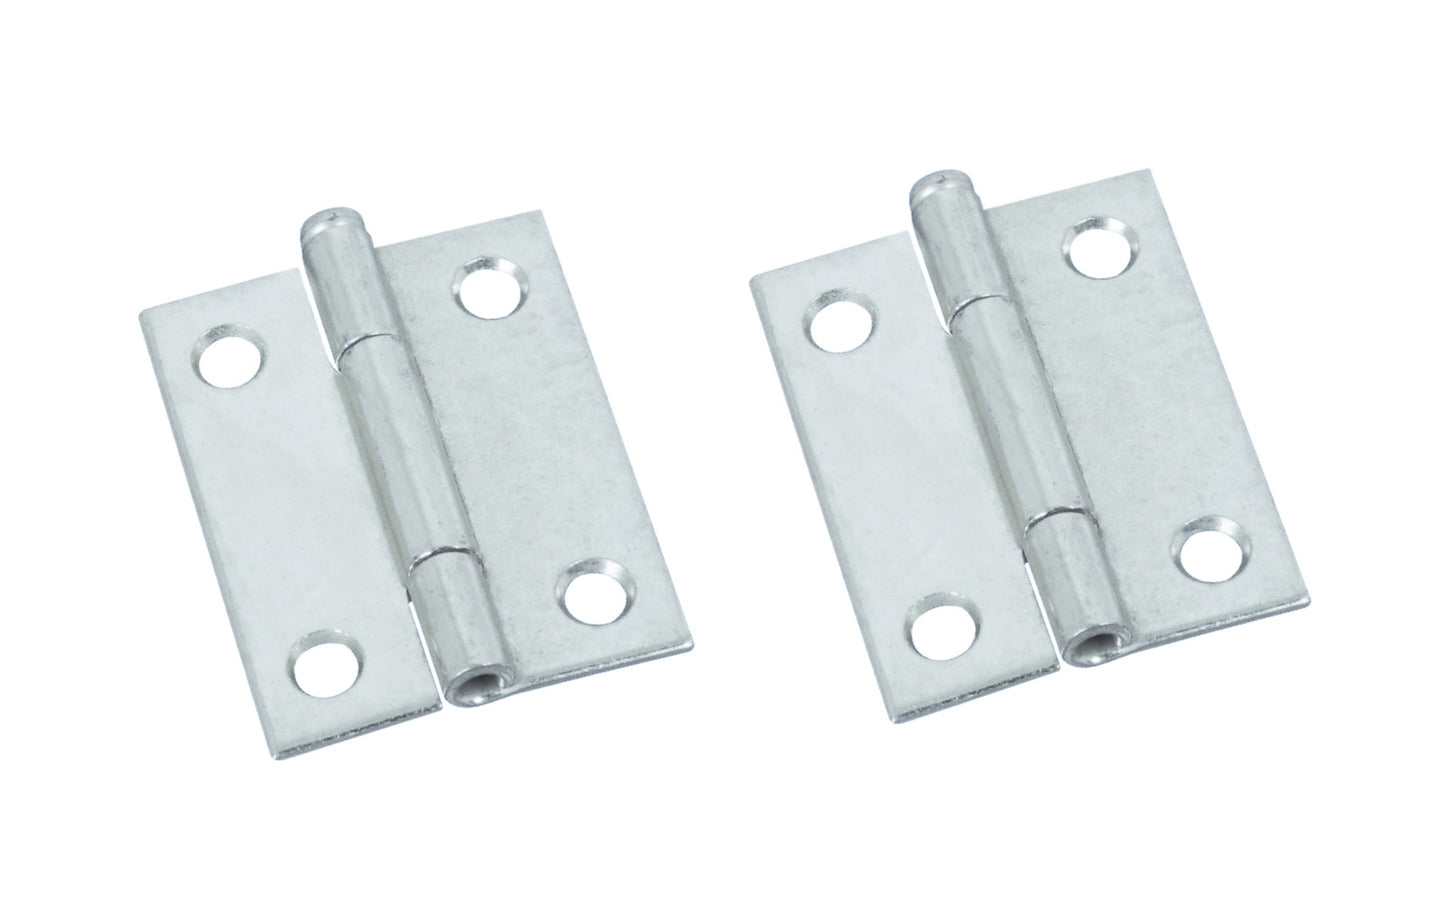 2" Zinc-Plated Loose-Pin Narrow Hinges - 2 Pack. 2" high x 1-9/16" wide. Made of cold-rolled steel with zinc plating. Surface mount. Removable pin hinges. Sold as a pair of hinges. National Hardware Model No. N141-838. 038613141834